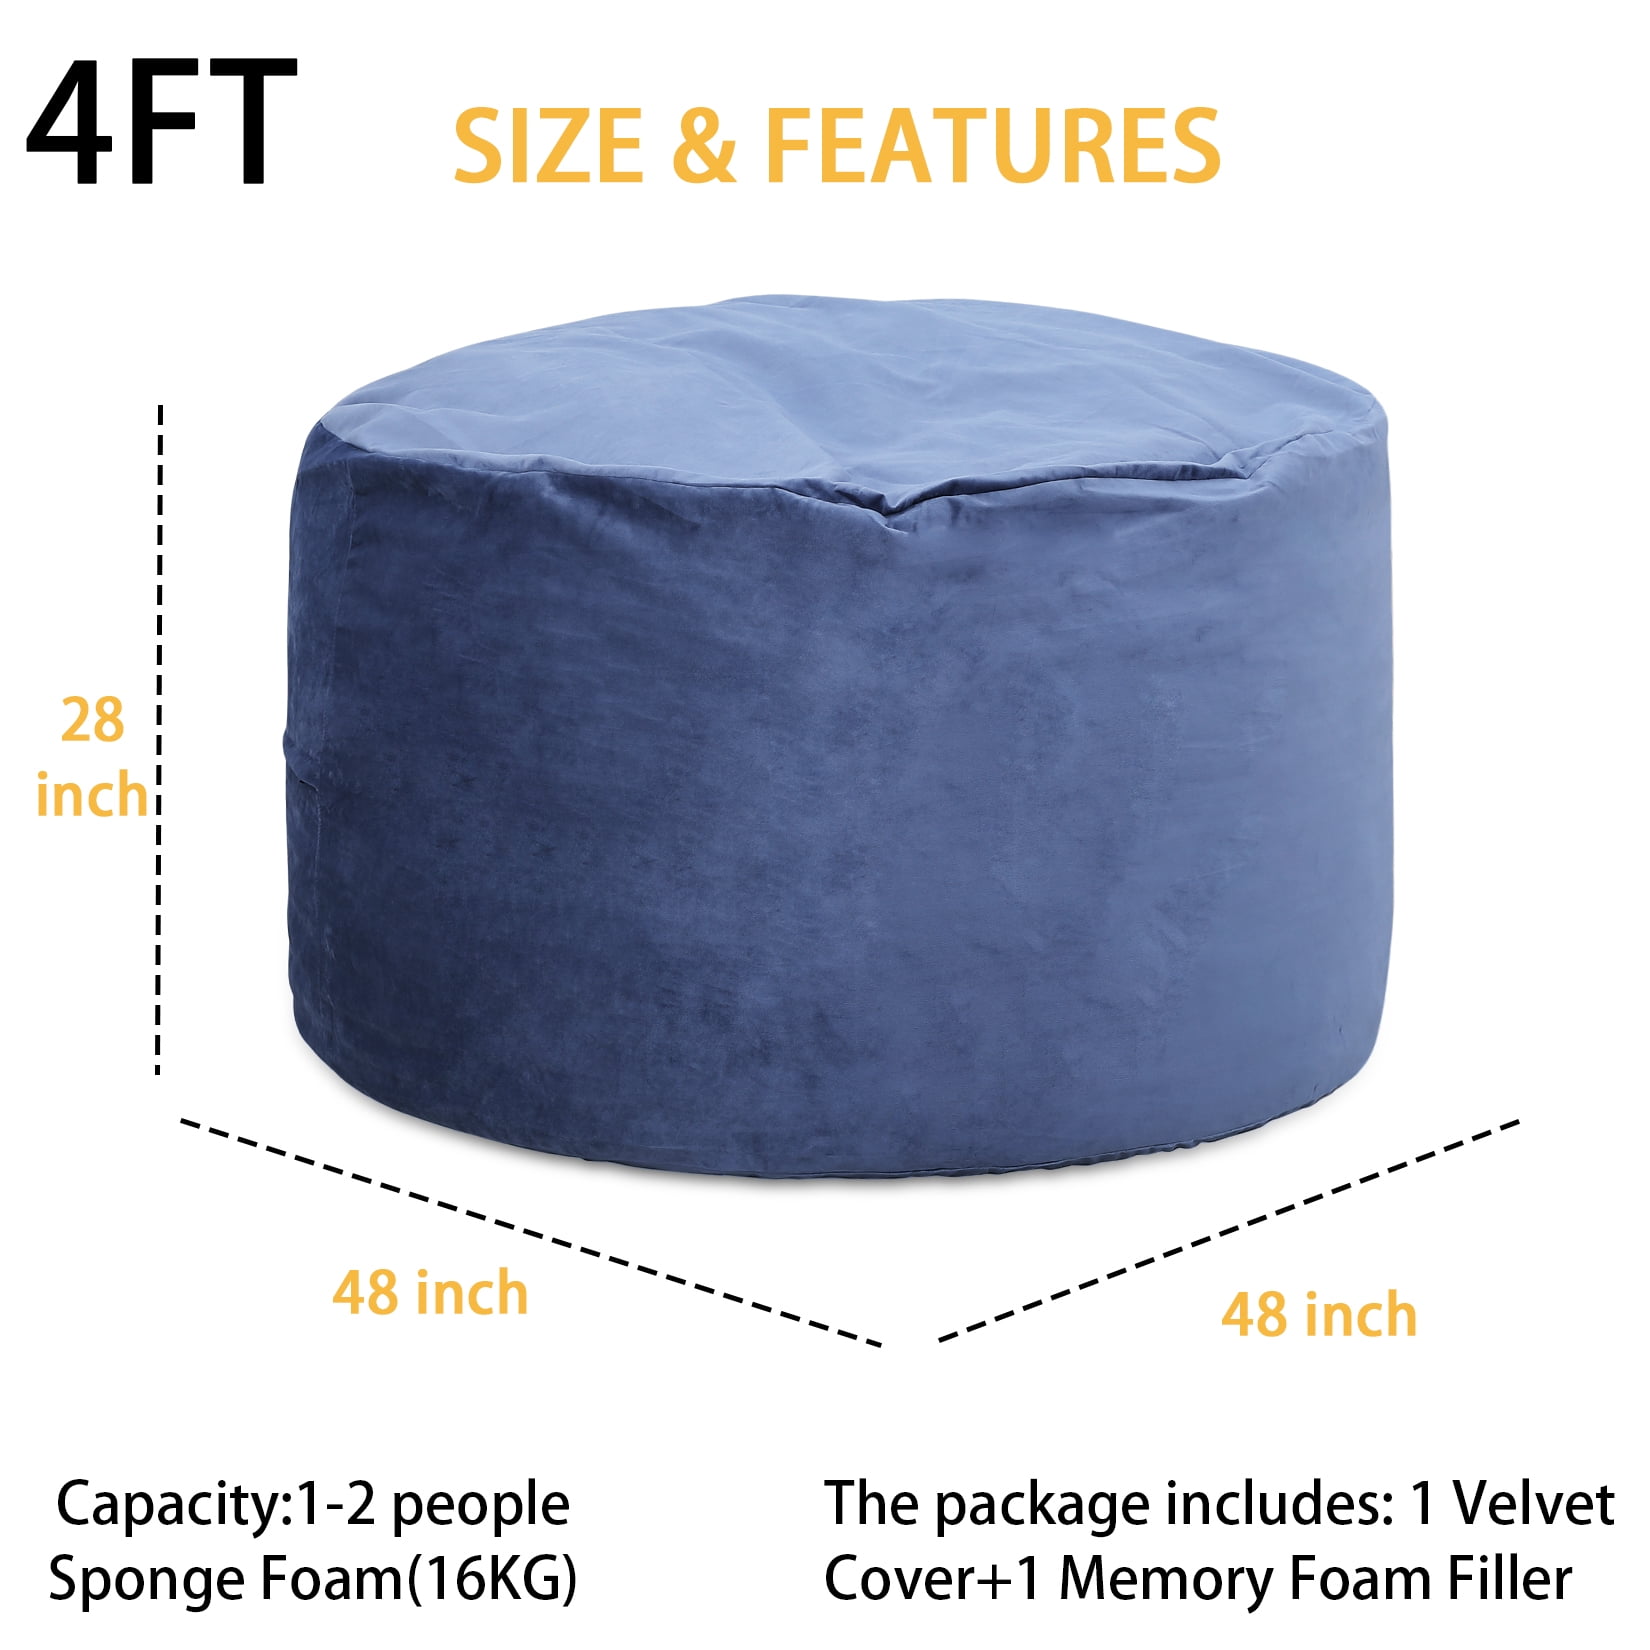 EDUJIN 4 ft Bean Bag Chair: 4' Large Memory Foam Bean Bag Chairs for Adults  with Filling,Ultra Soft Dutch Velvet Cover,Round Fluffy Lazy Sofa for